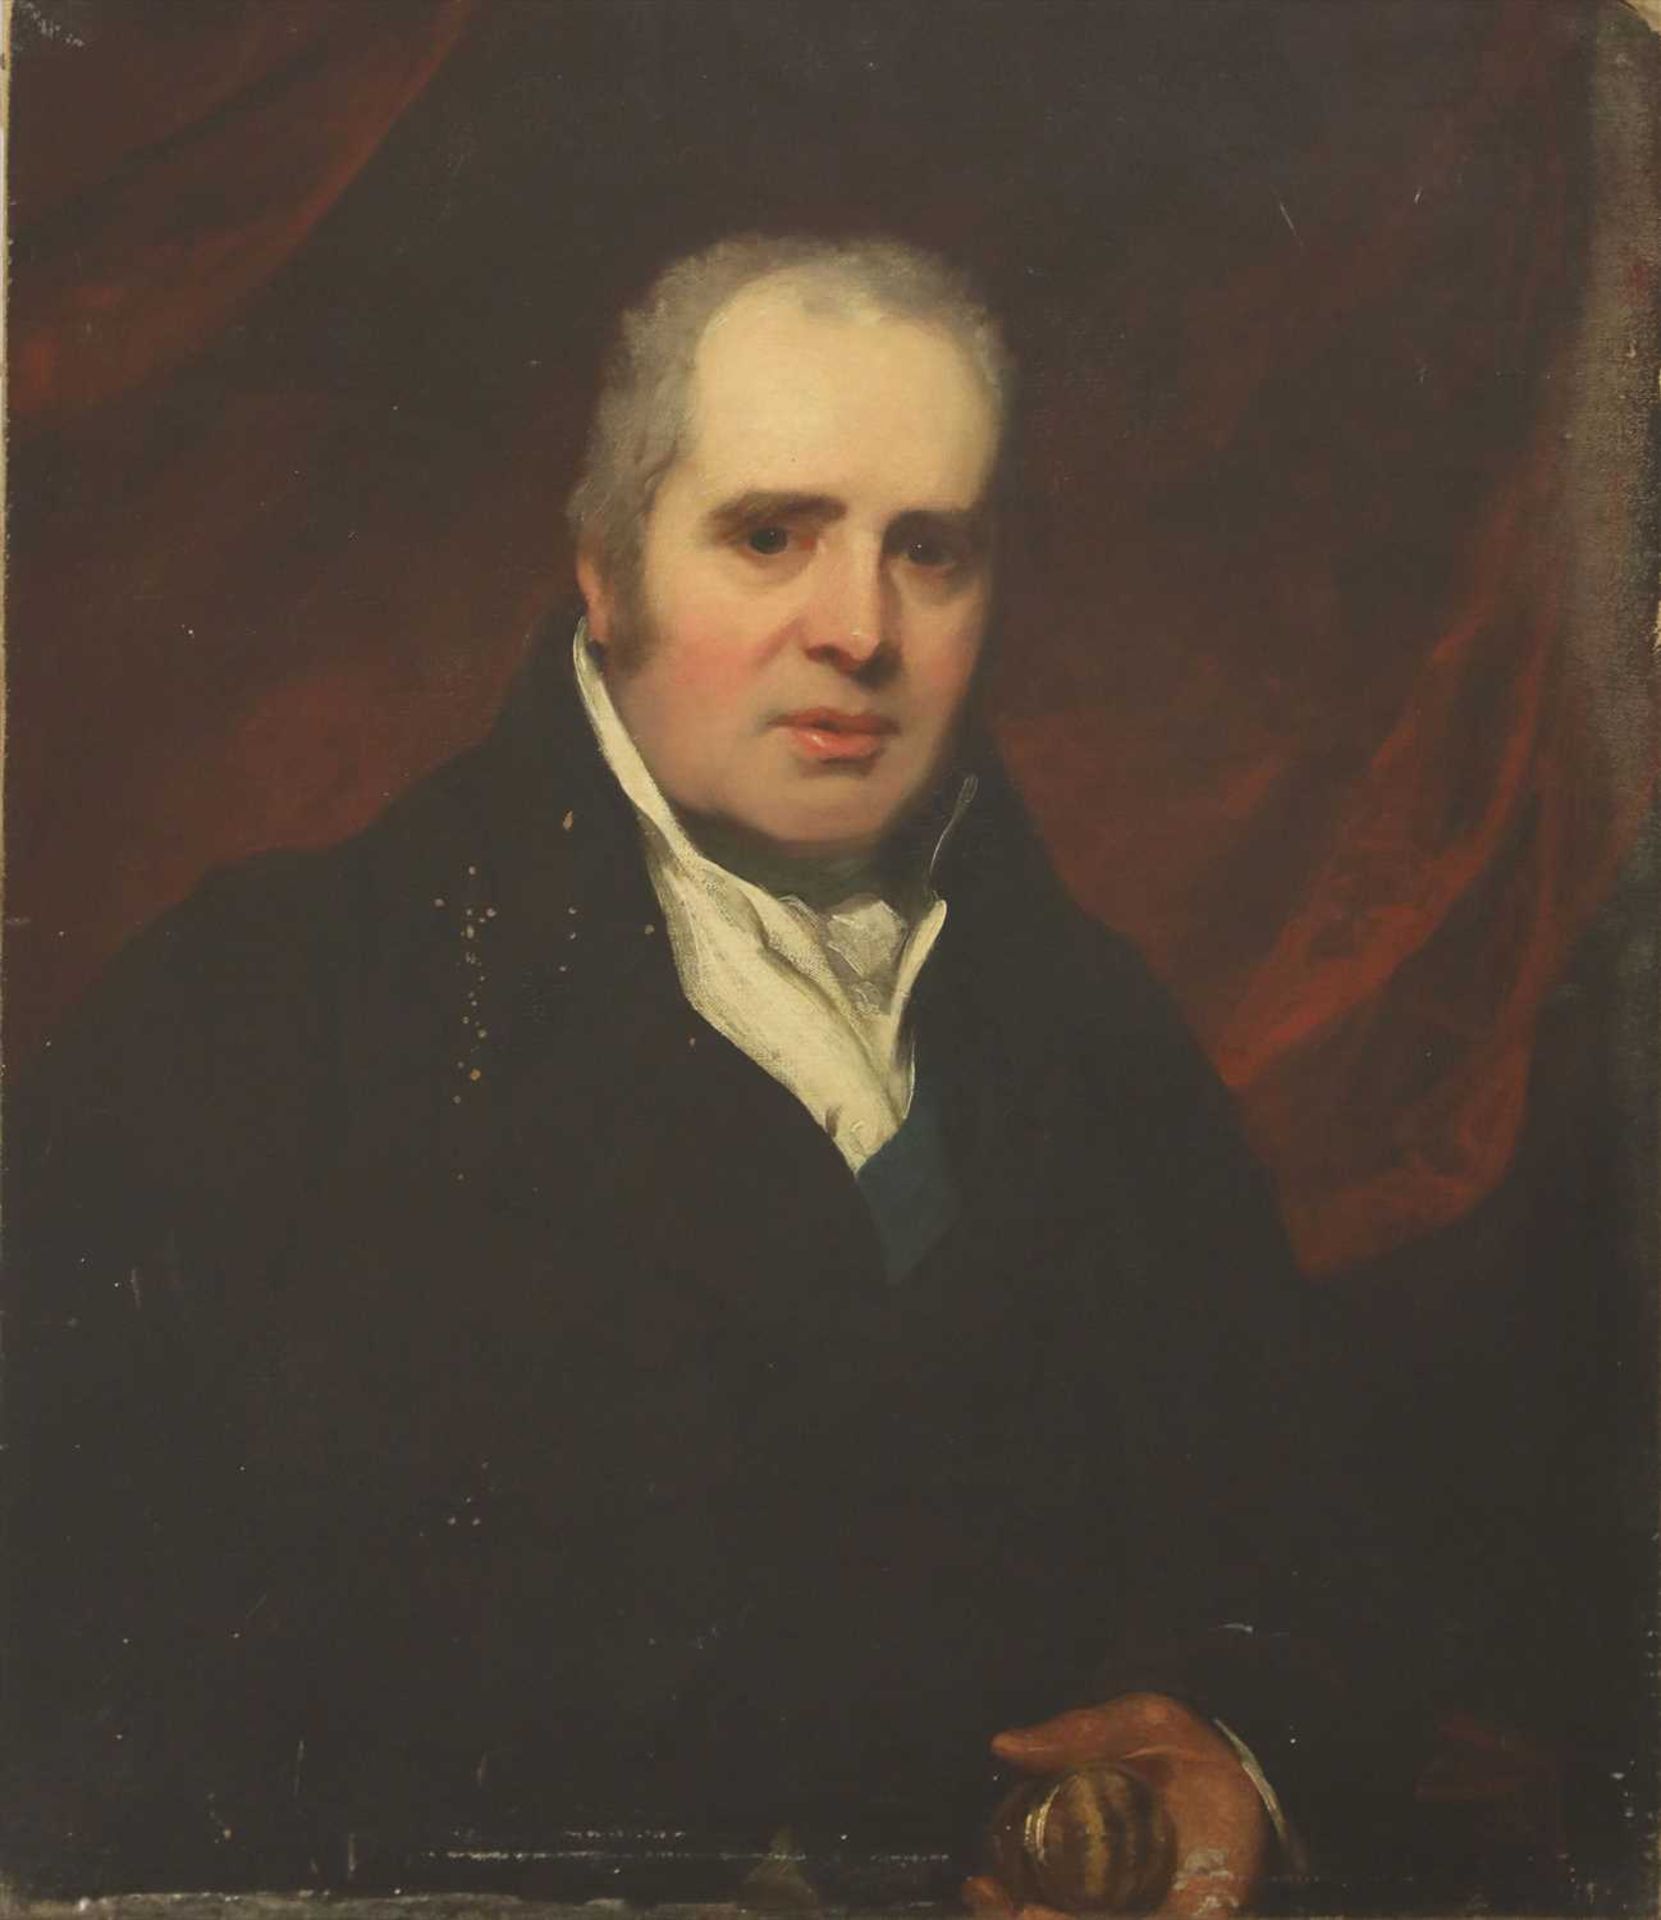 Attributed to Thomas Phillips RA (1770-1845)